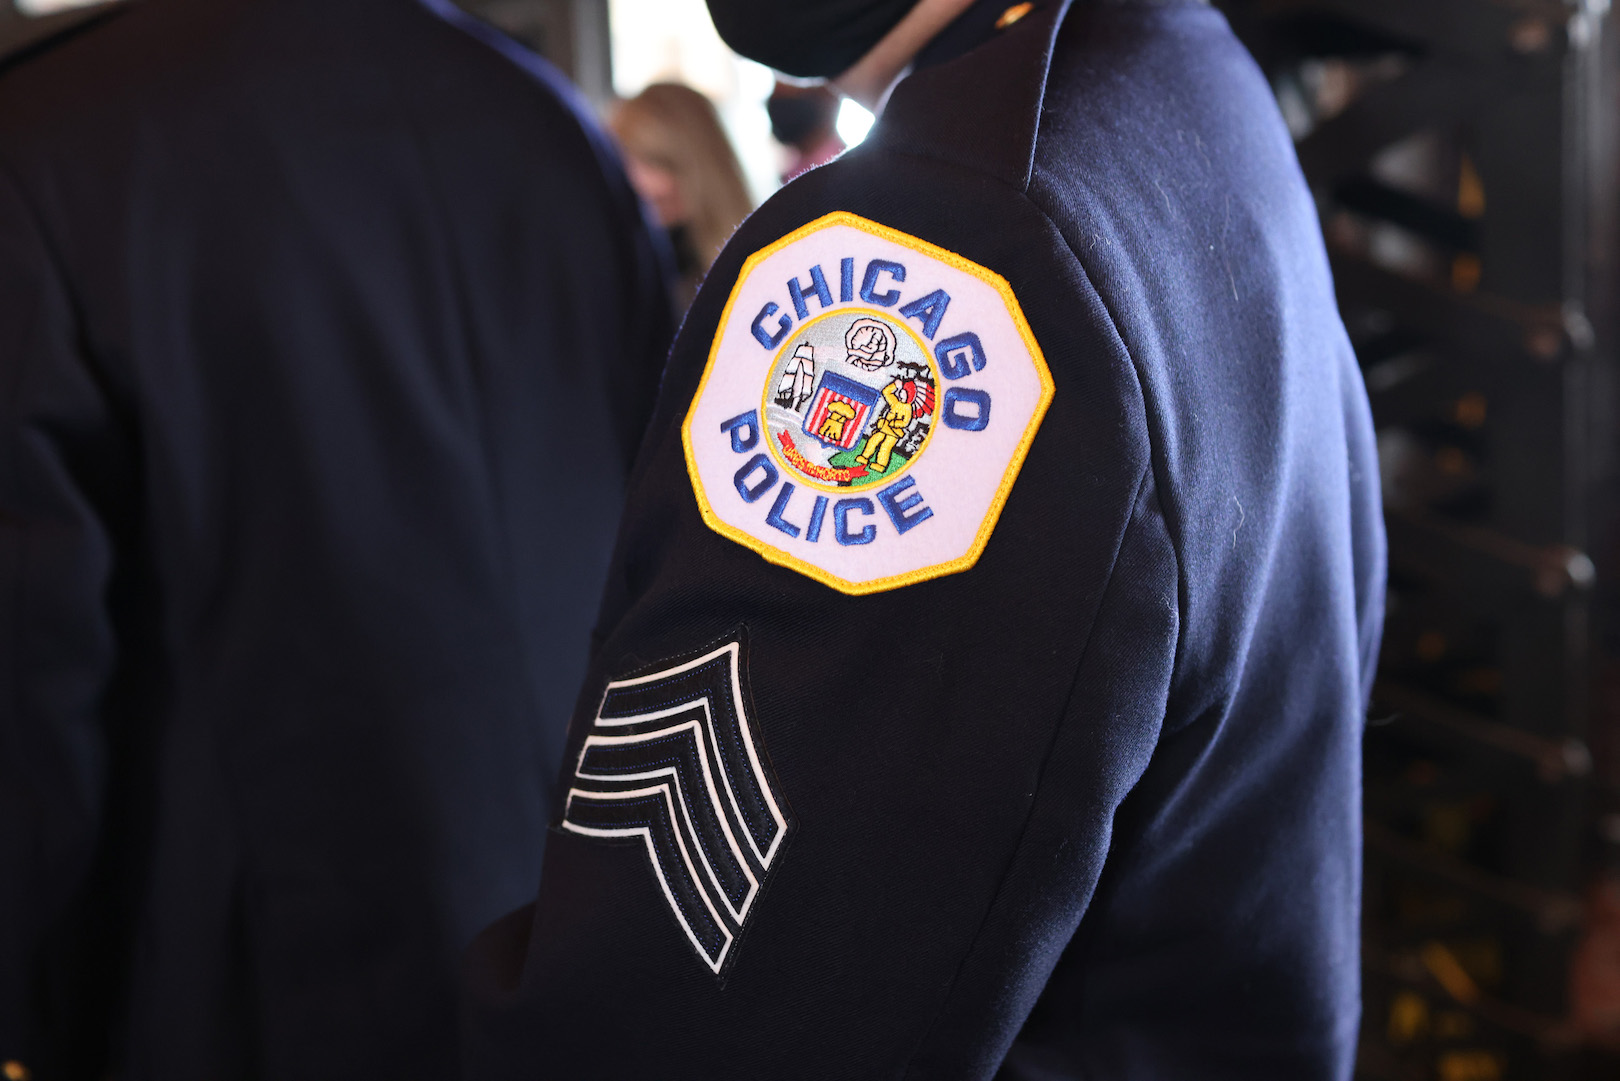 Chicago police officer shot dead after responding to domestic incident call